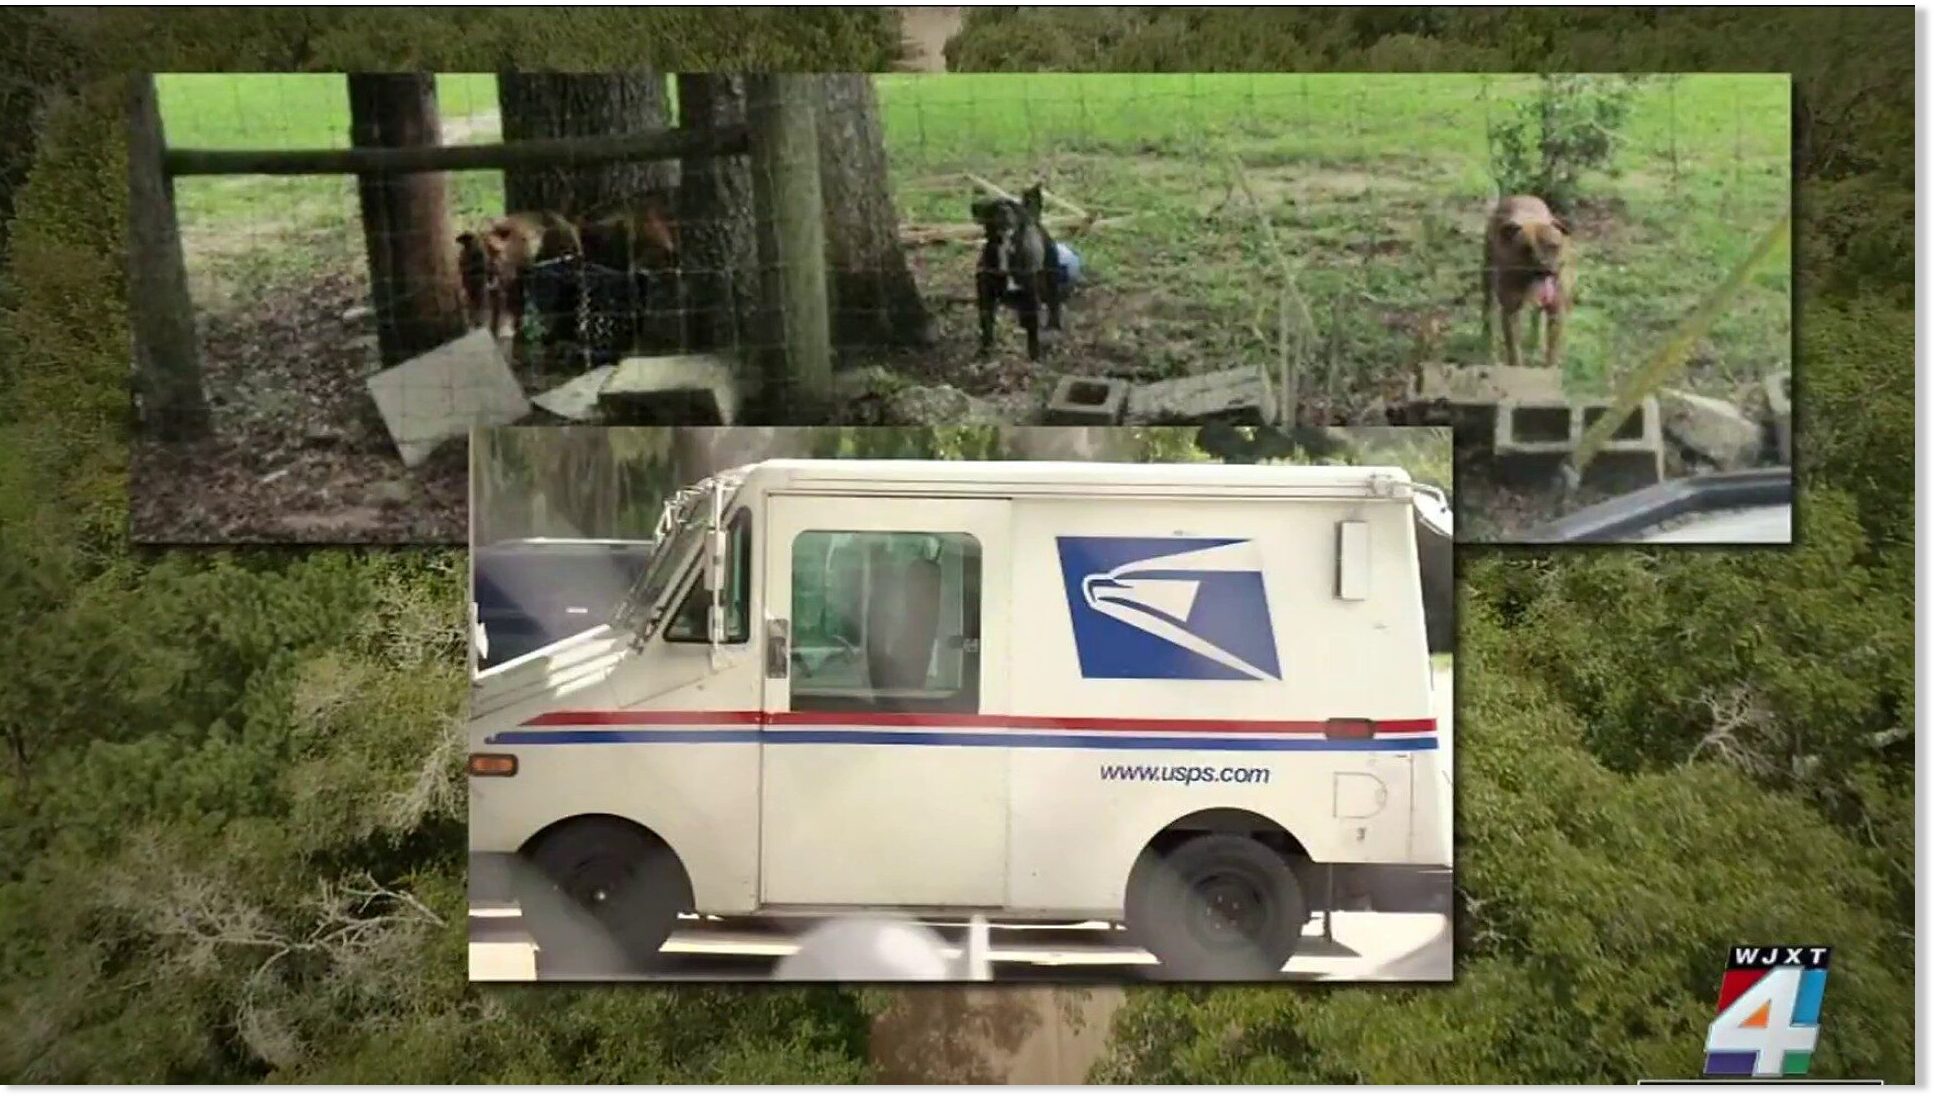 Postal worker dies after dog attack in Putnam County, Florida — Earth